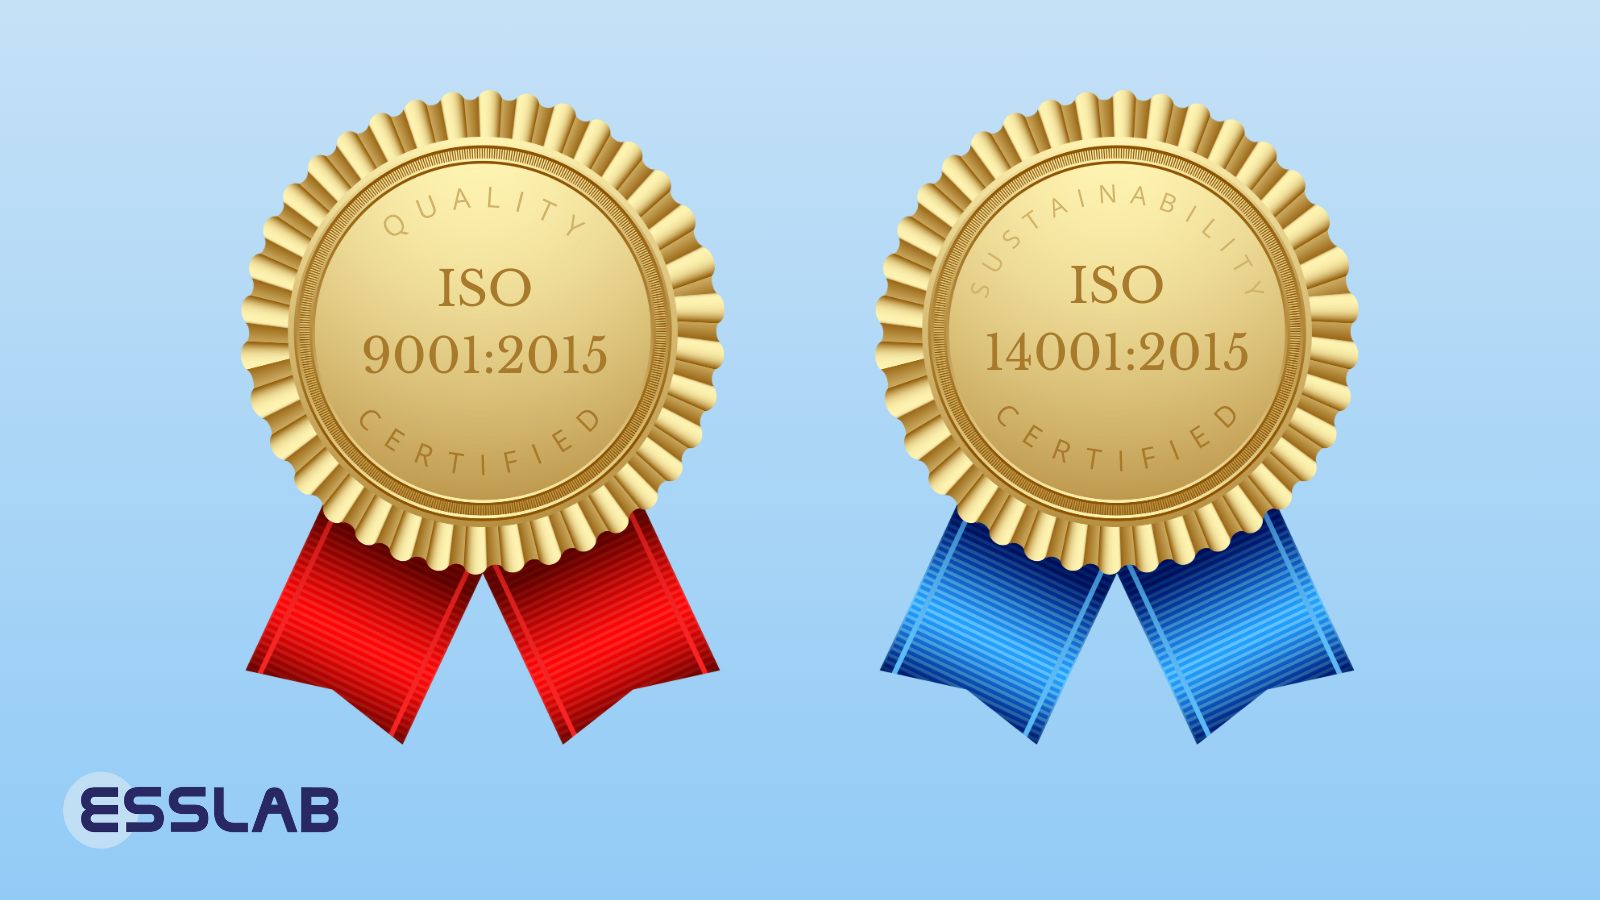 Two identical gold medals, one with Red Ribbon, one with Blue Ribbon. Etched with 'ISO 9001:2015 Certified' and 'ISO 14001:2015 Certified'